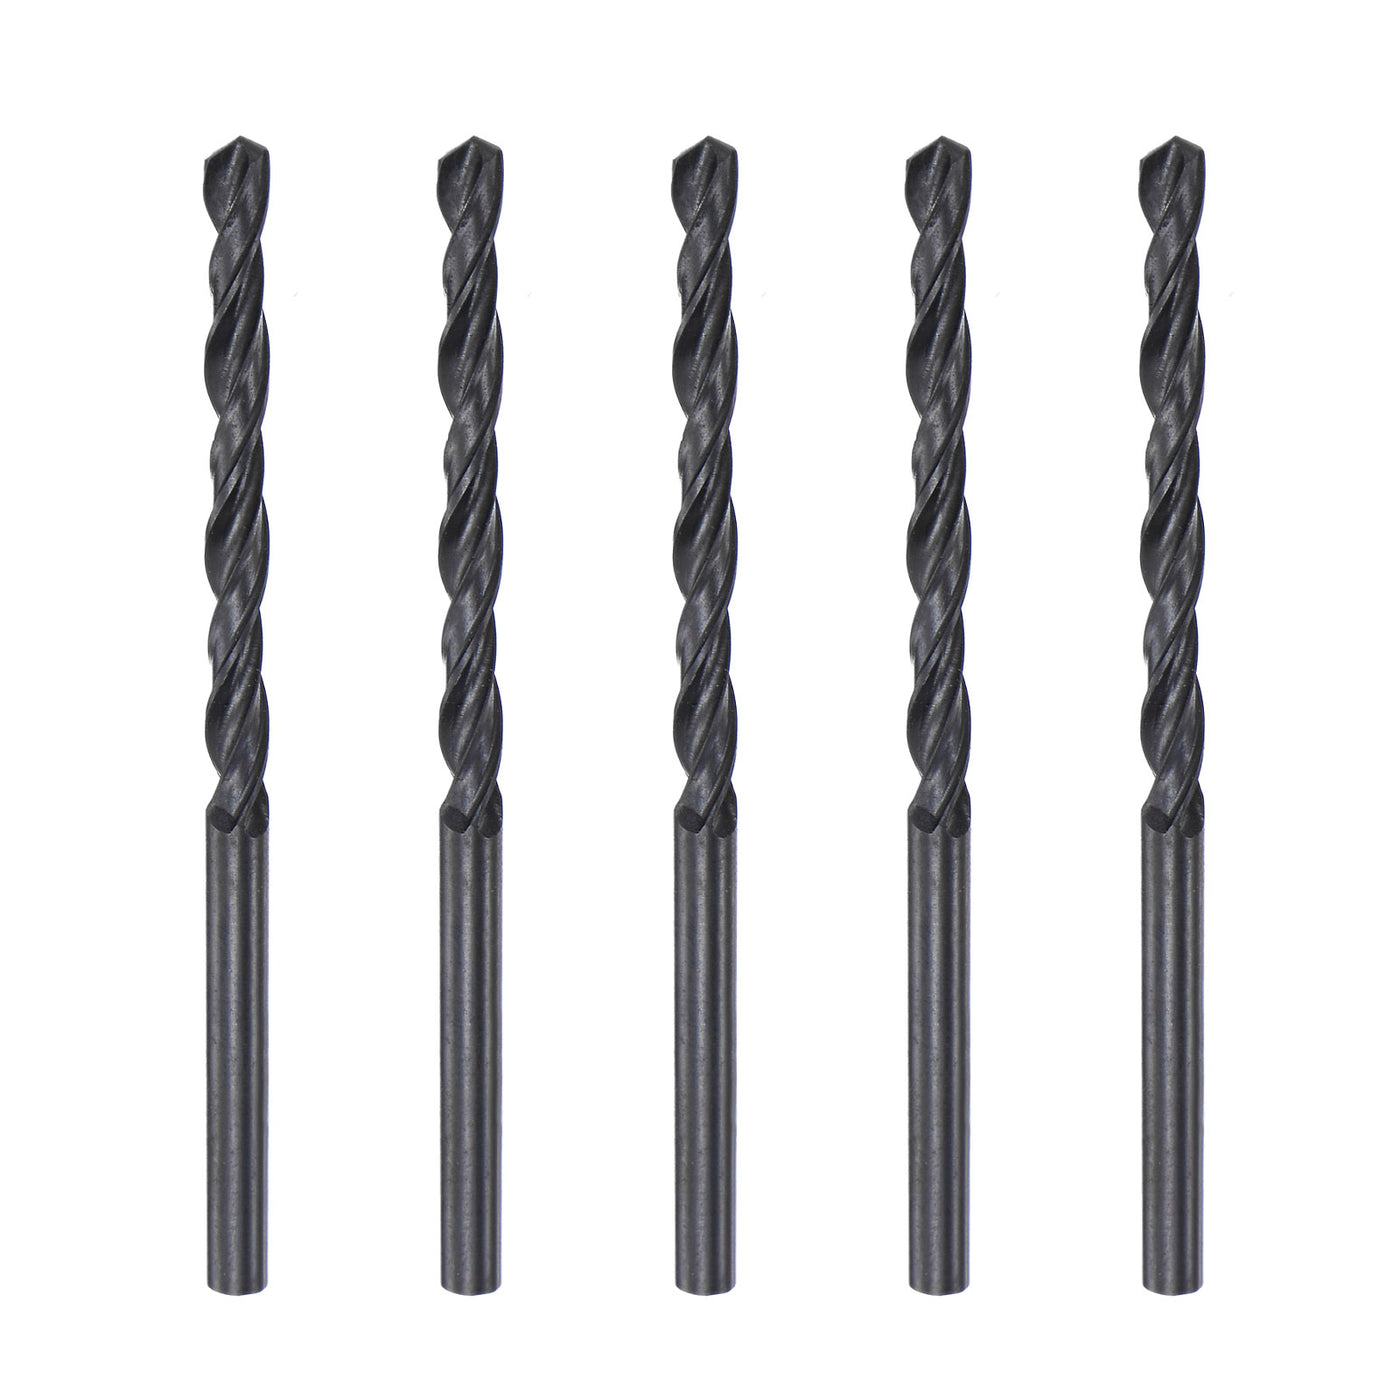 uxcell Uxcell High Speed Steel Twist Drill Bit, 3.6mm Fully Ground Black Oxide 68mm Long 5Pcs